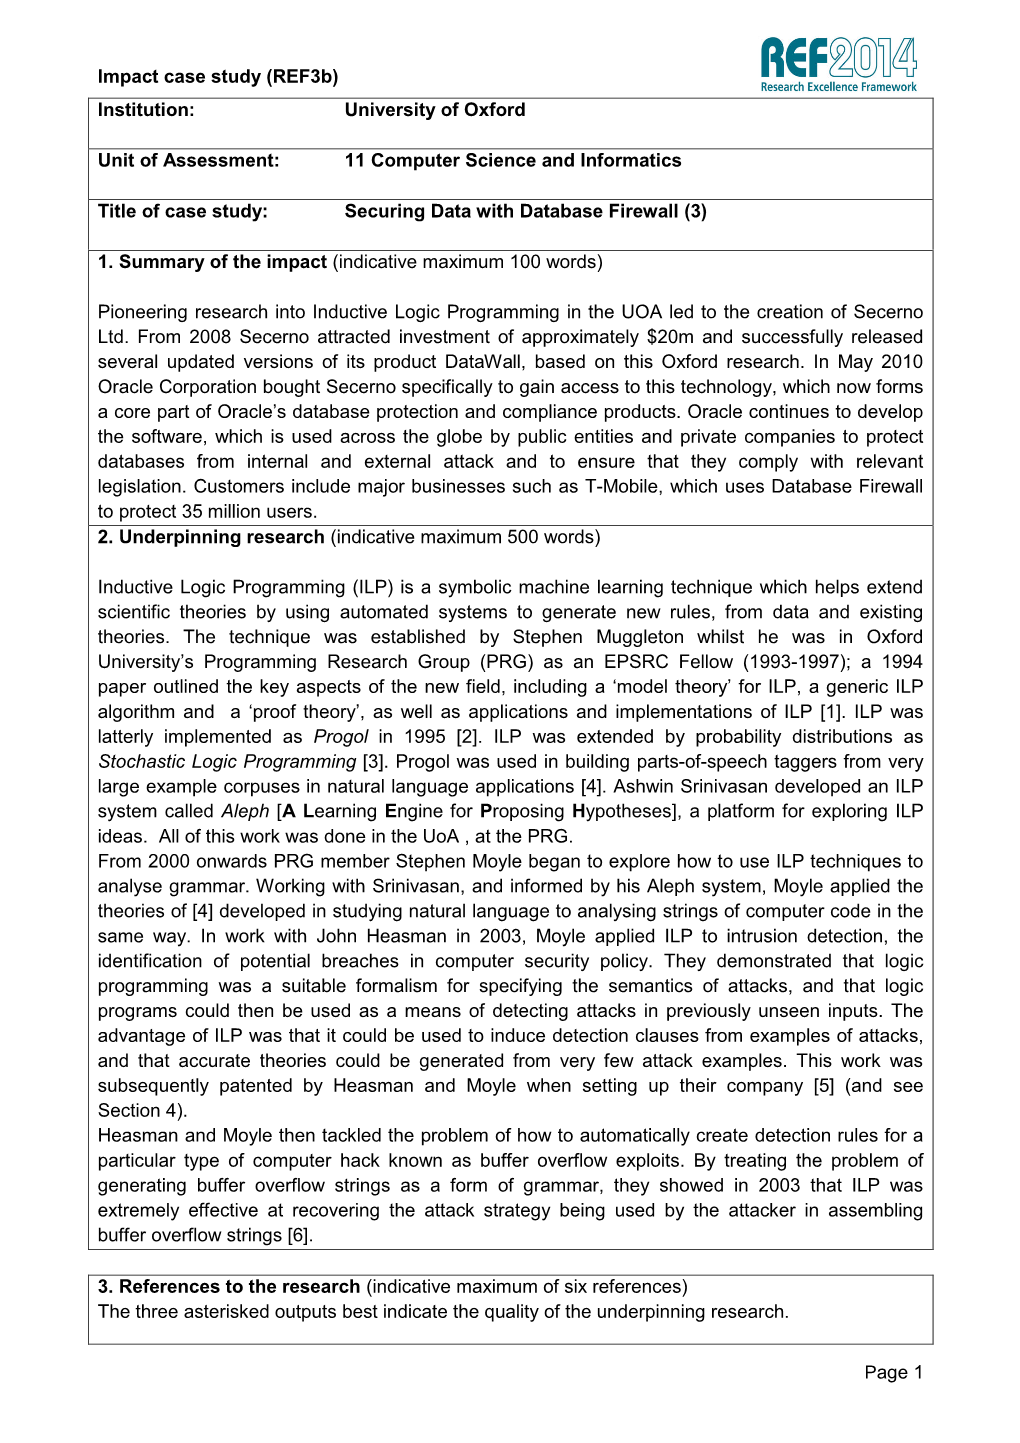 Impact Case Study (Ref3b) Page 1 Institution: University of Oxford